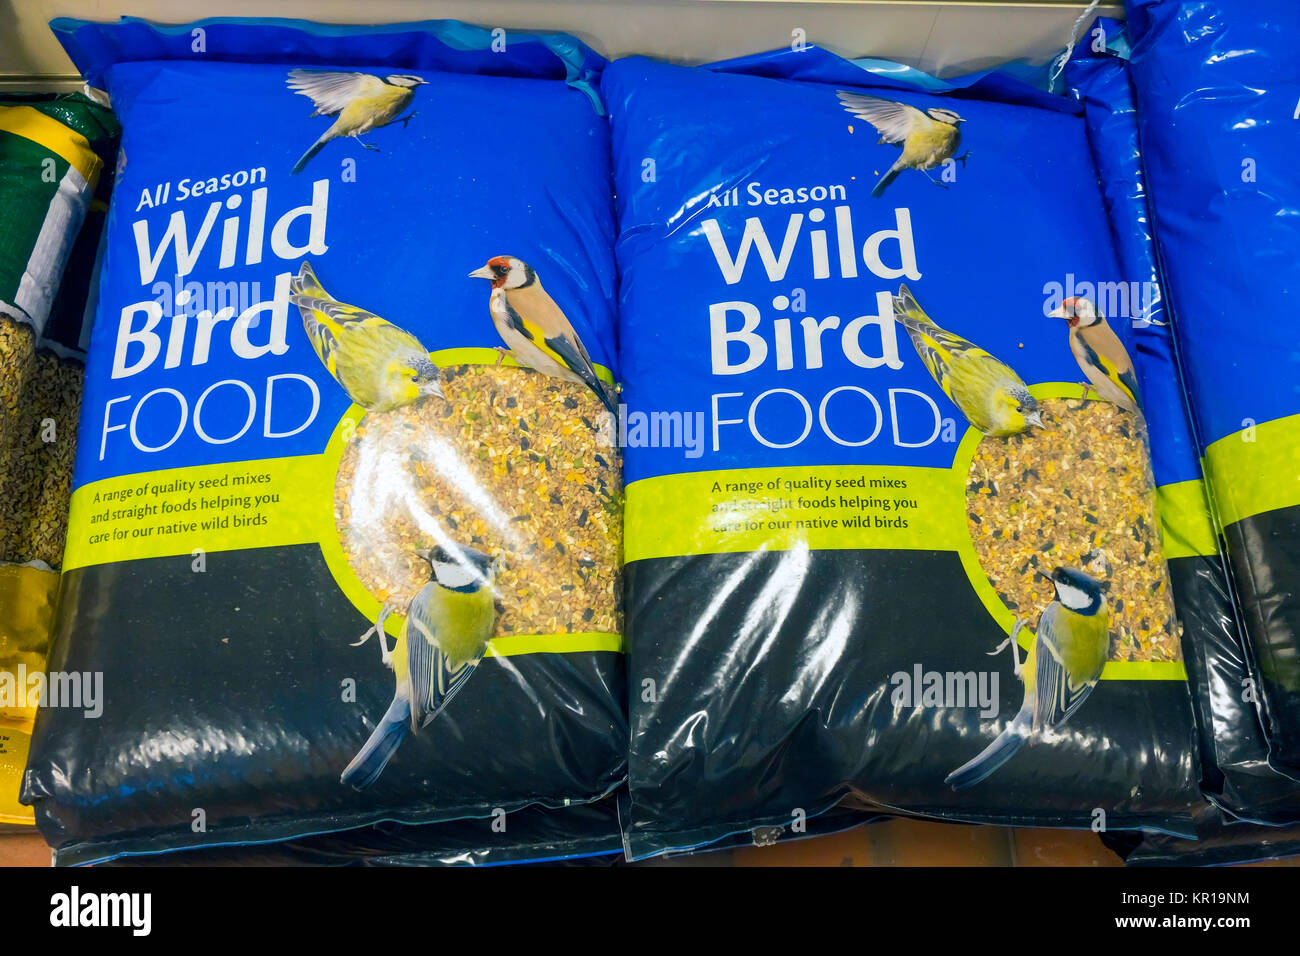 Large bags of All-Season wild bird food for sale in a garden centre Stock Photo